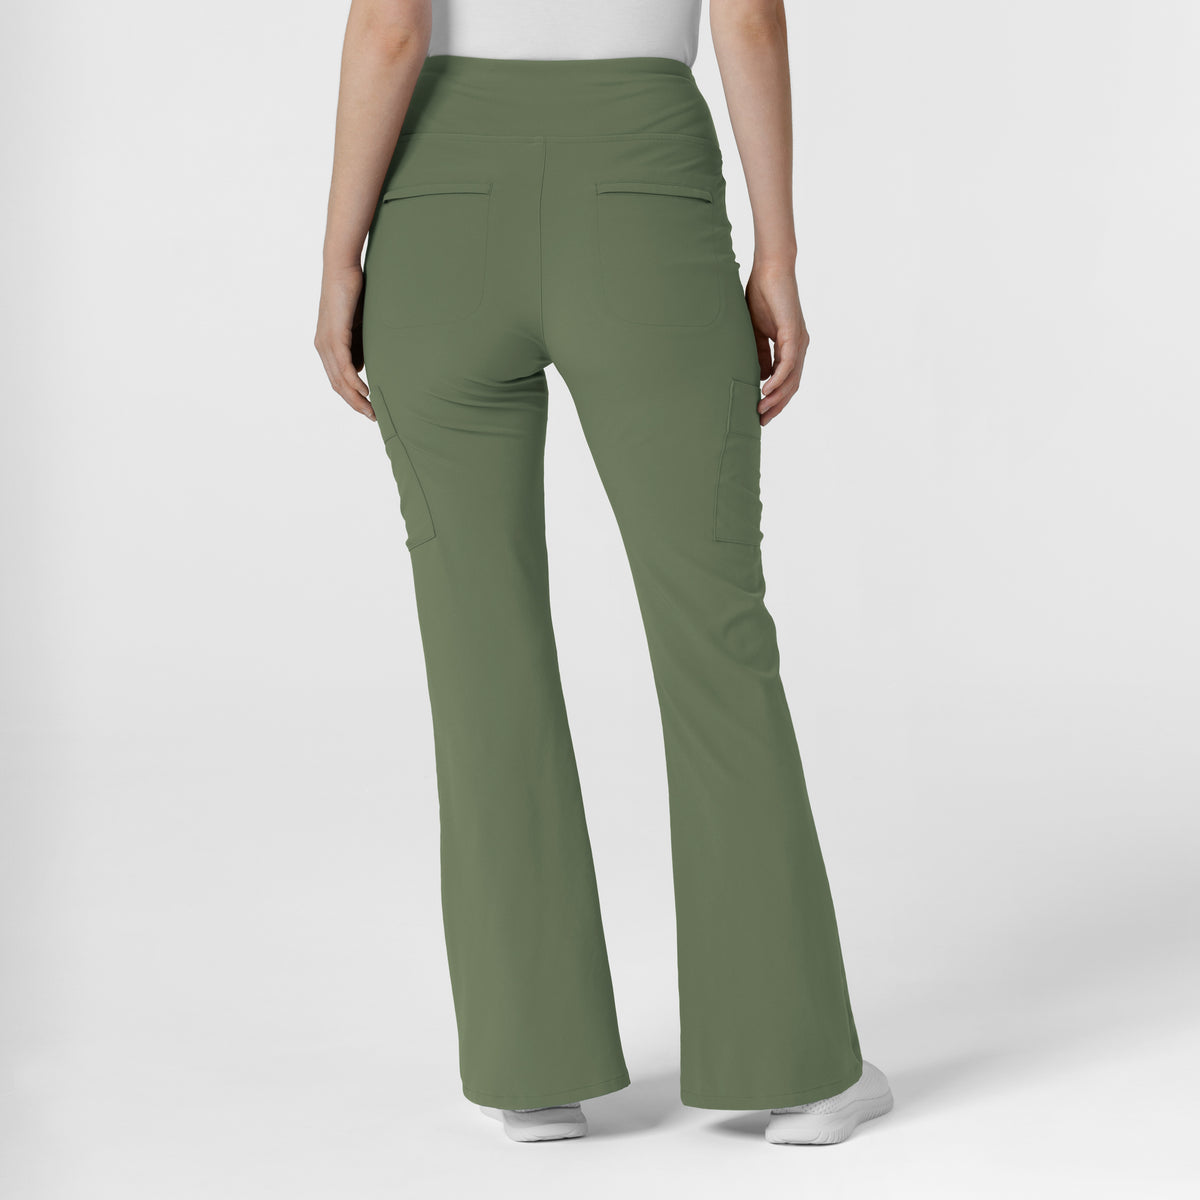 RENEW Women's Cargo Flare Scrub Pant Olive back view